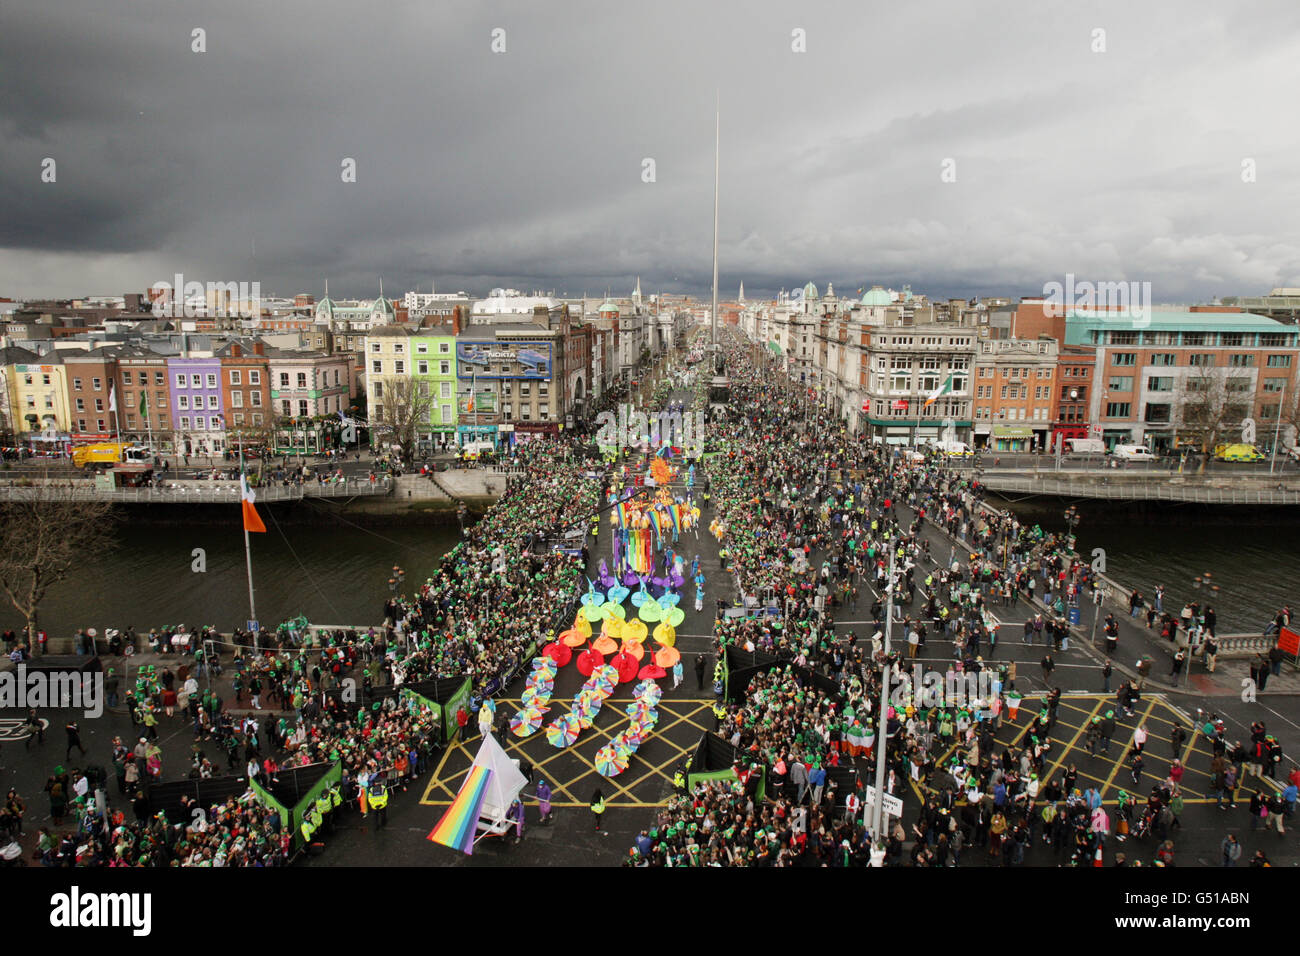 Huge crowds gather for the St Patrick's Day Parade on O'Connell Street, Dublin. Stock Photo